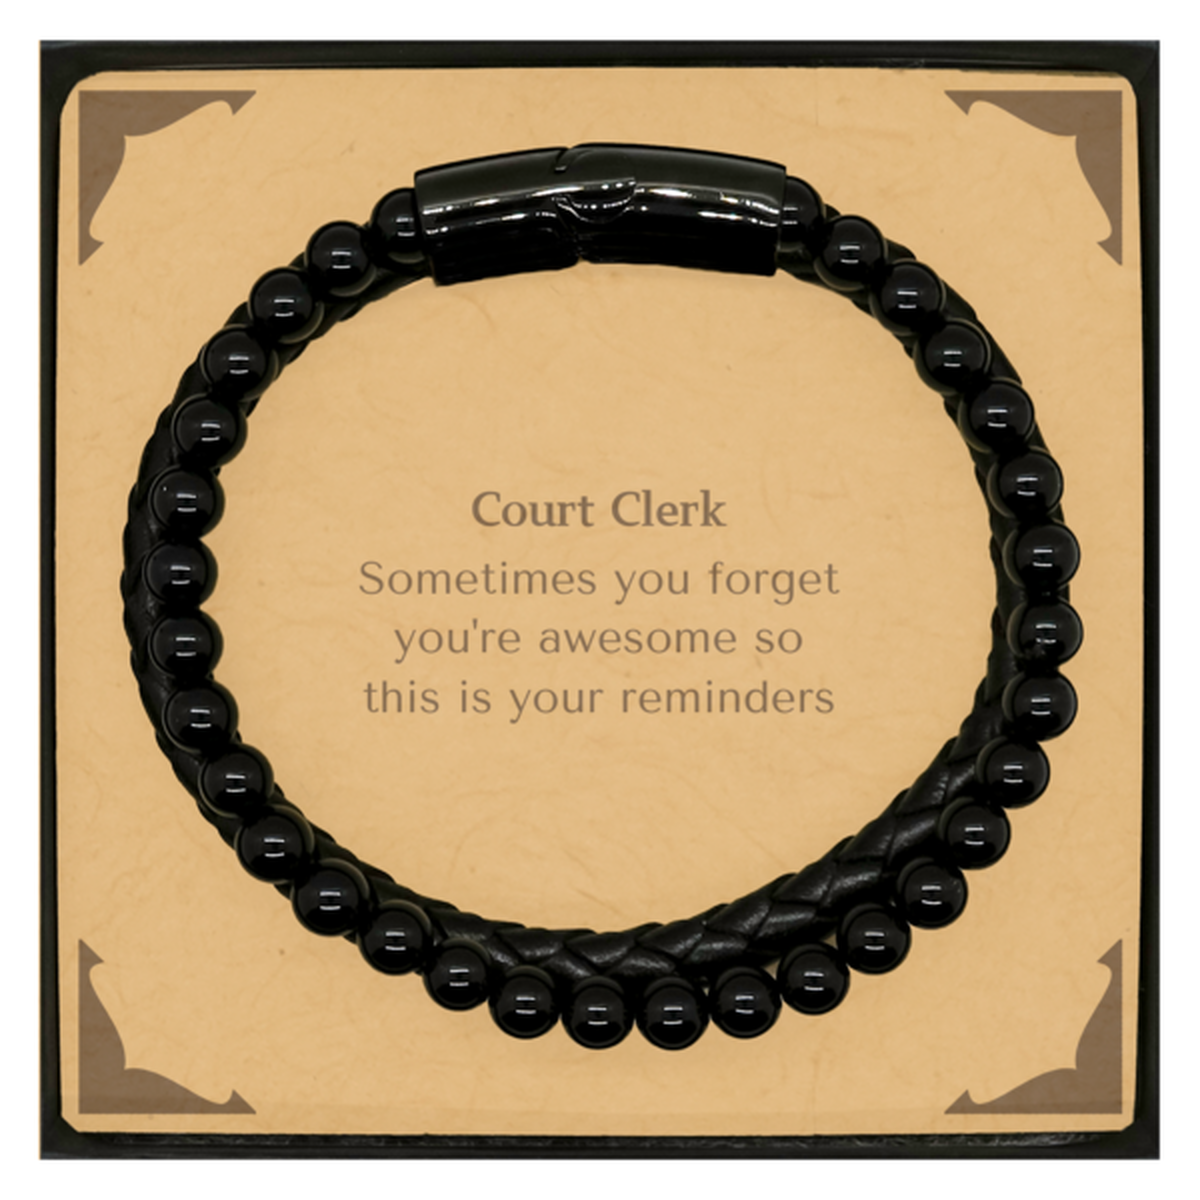 Sentimental Court Clerk Stone Leather Bracelets, Court Clerk Sometimes you forget you're awesome so this is your reminders, Graduation Christmas Birthday Gifts for Court Clerk, Men, Women, Coworkers